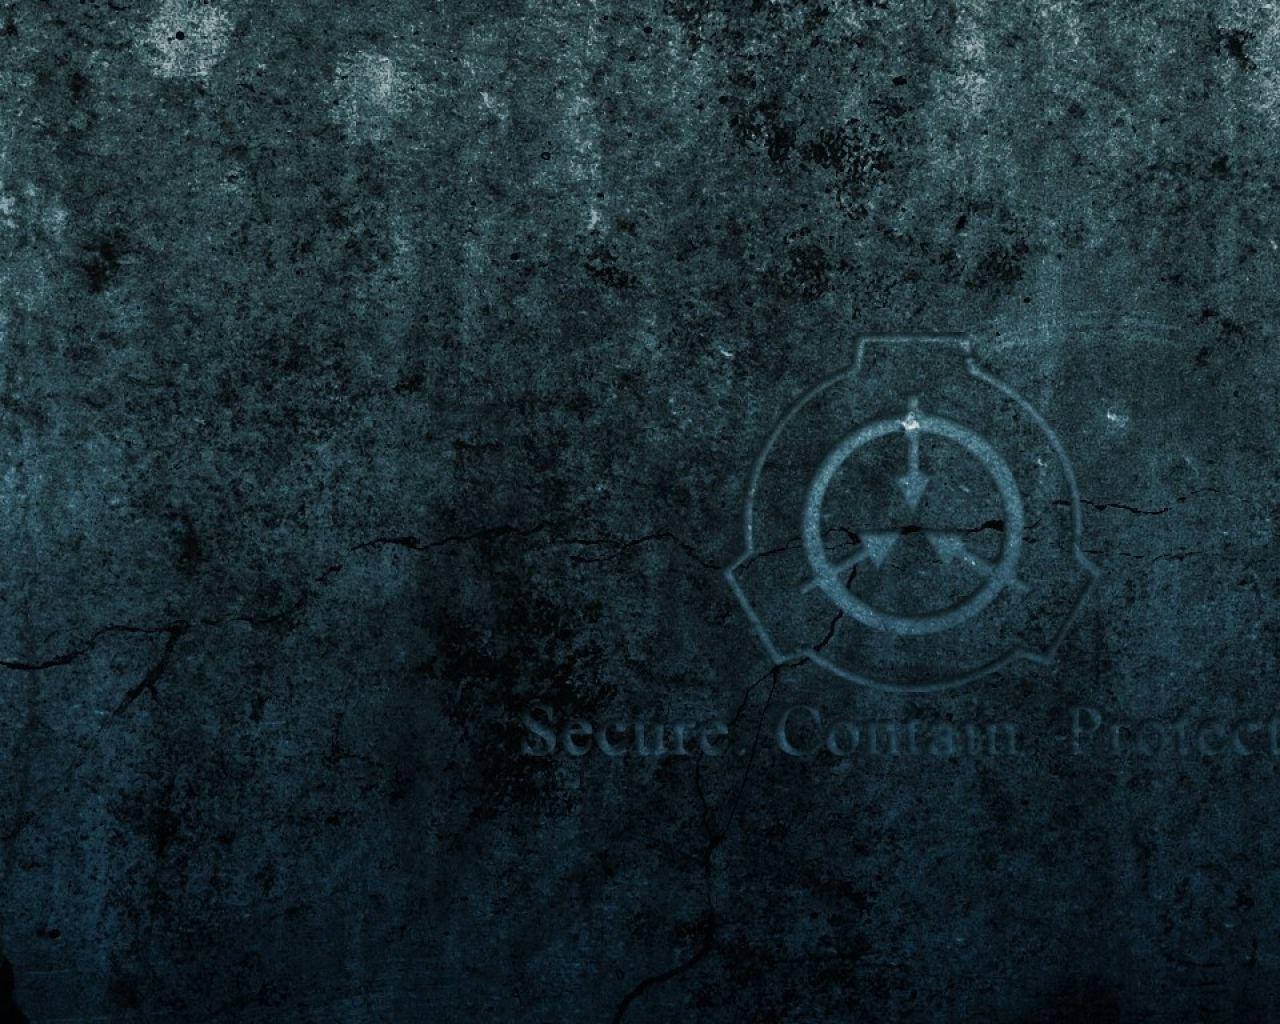 Scp Logo On The Wall